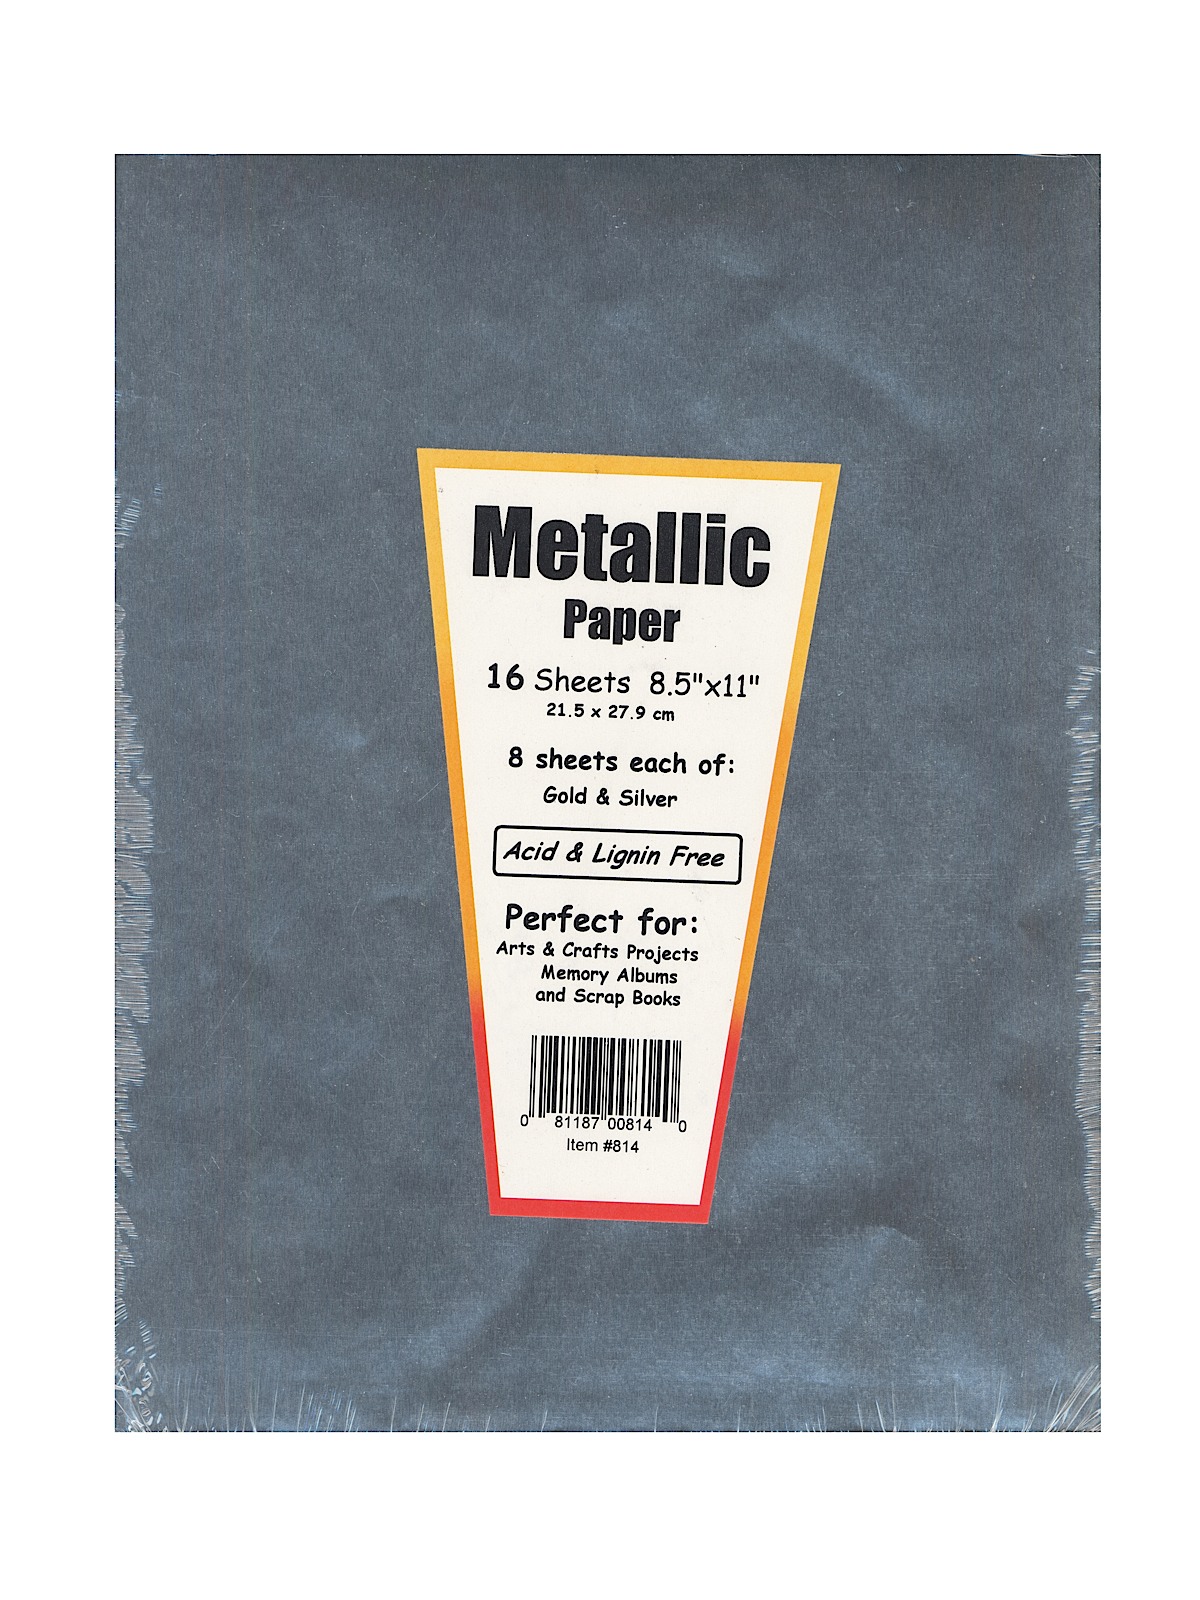 Metallic Foil Paper 8.5 In. X 11 In. Pack Of 16 8 Gold, 8 Silver